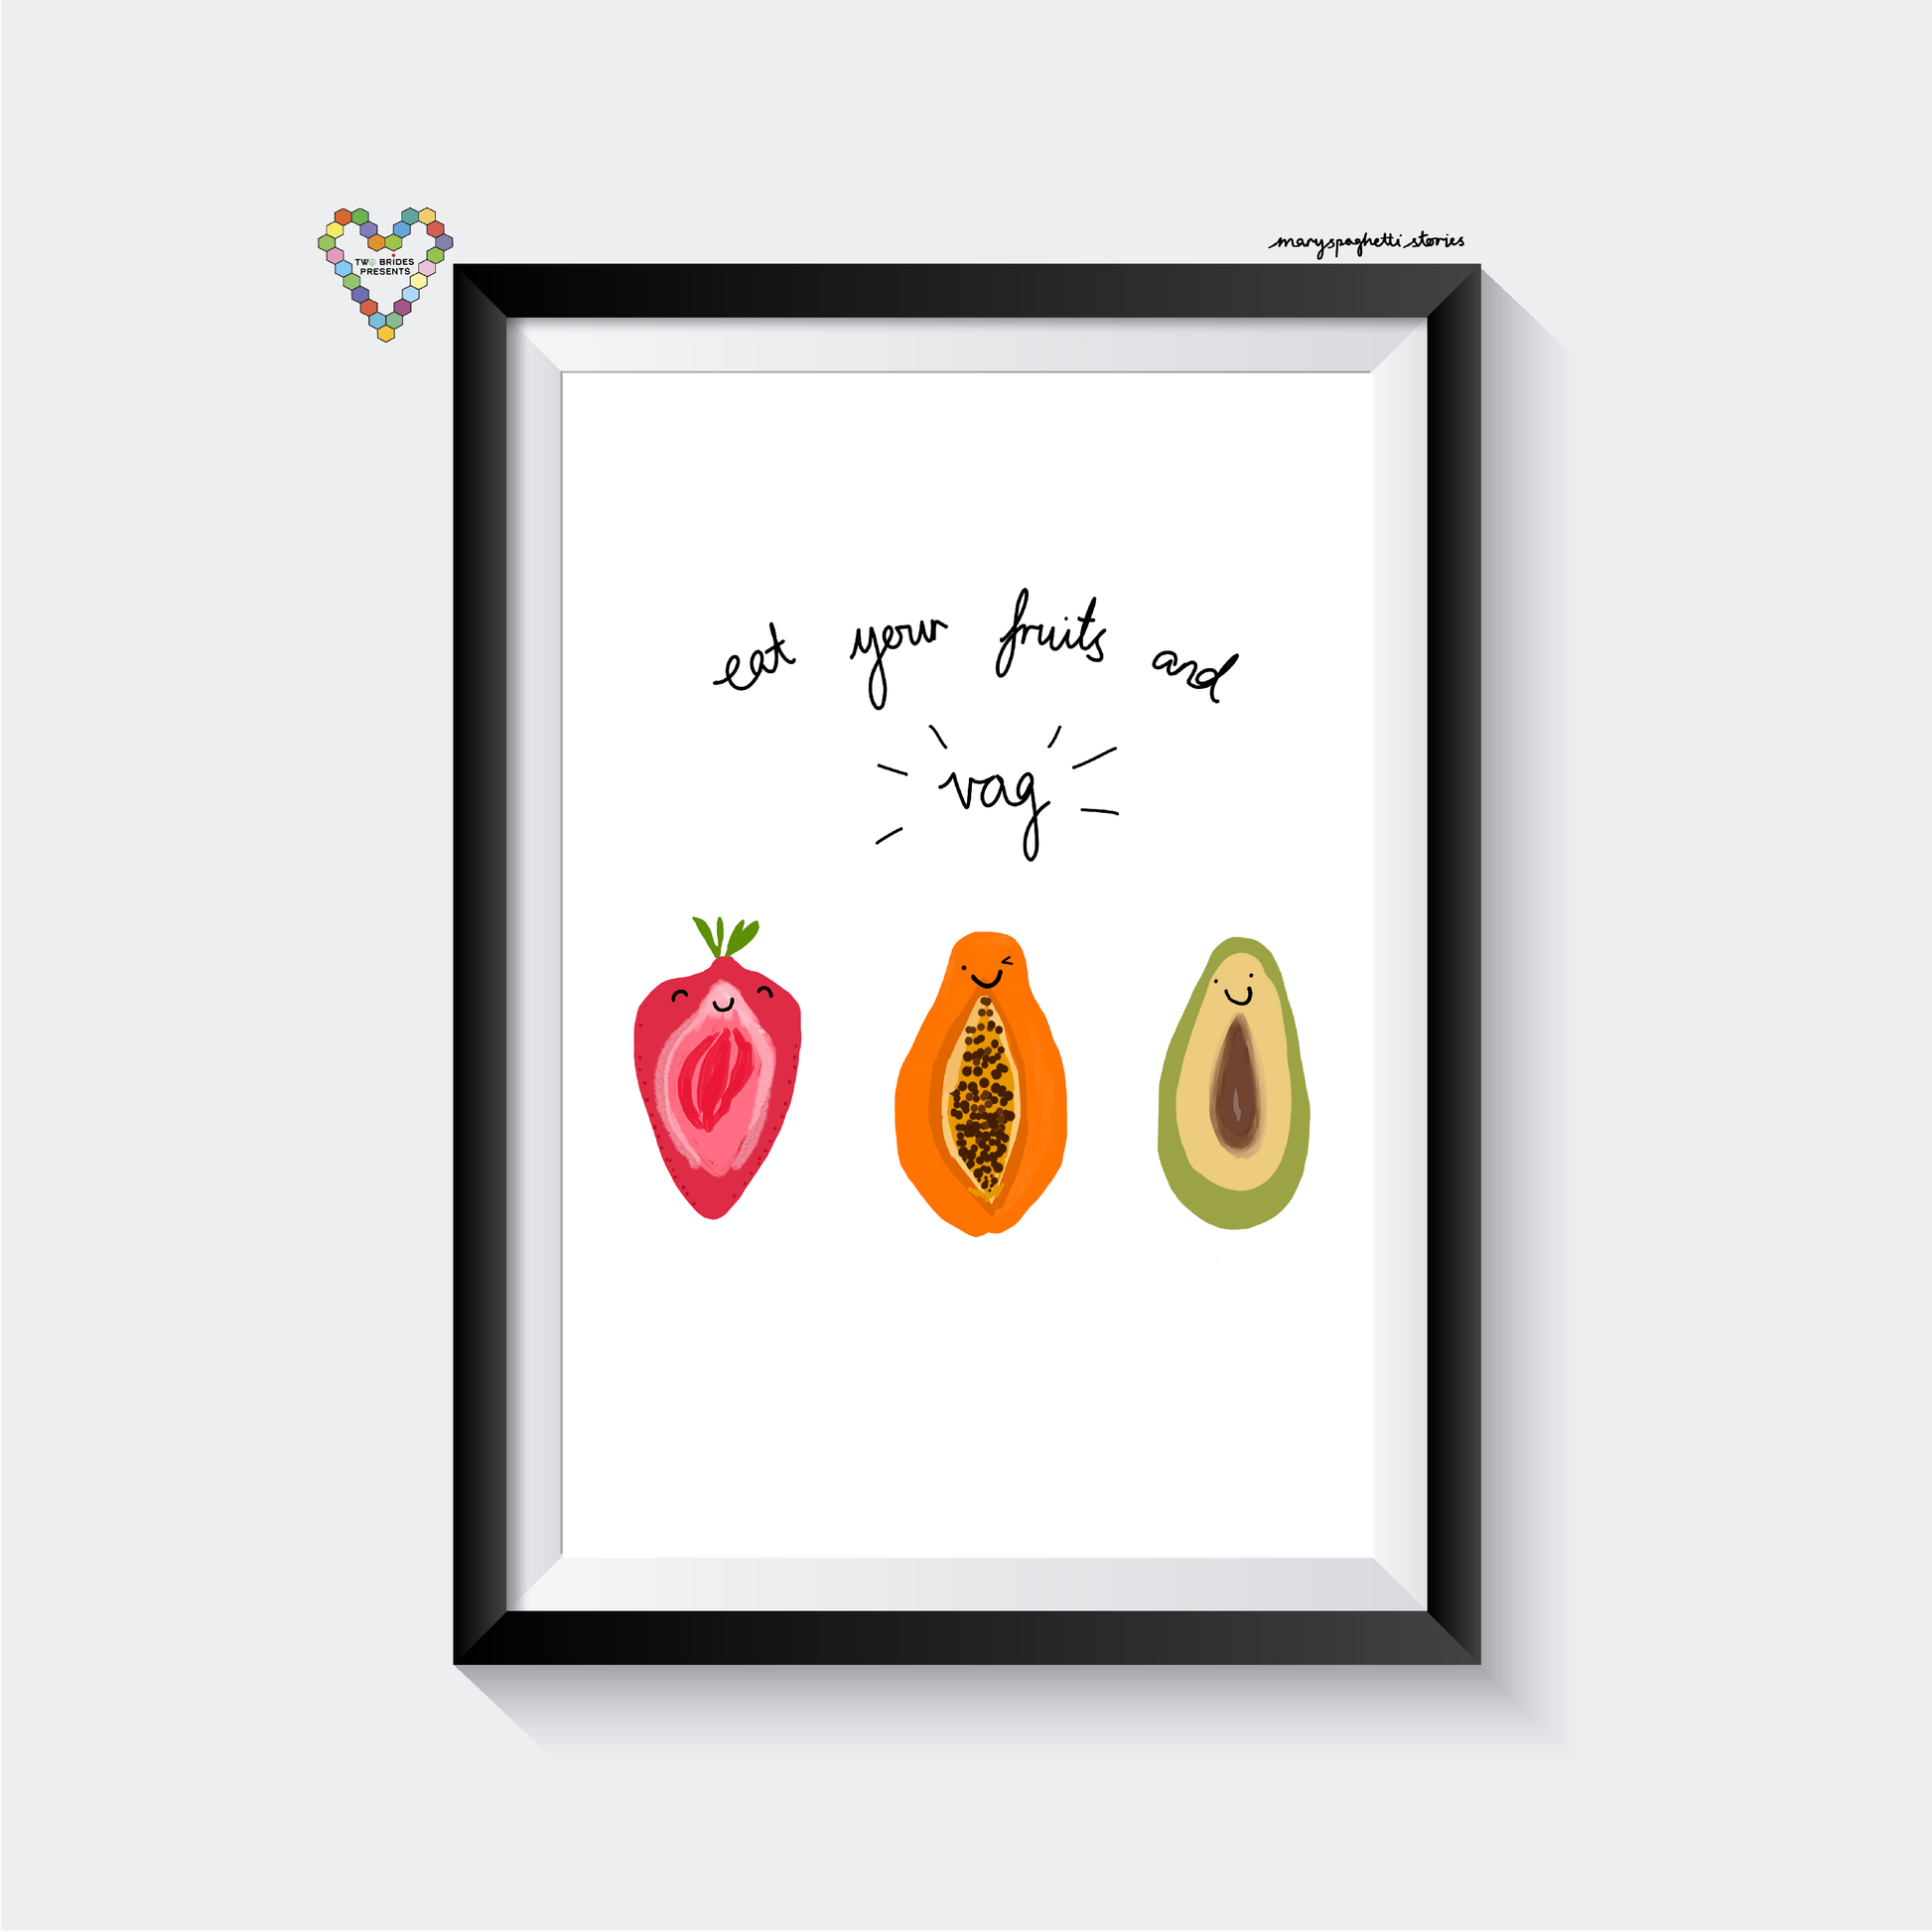 Eat your fruits and vag anniversary & valentine's day funny print featuring 3 smiling fruit - strawberry, papaya and avocado